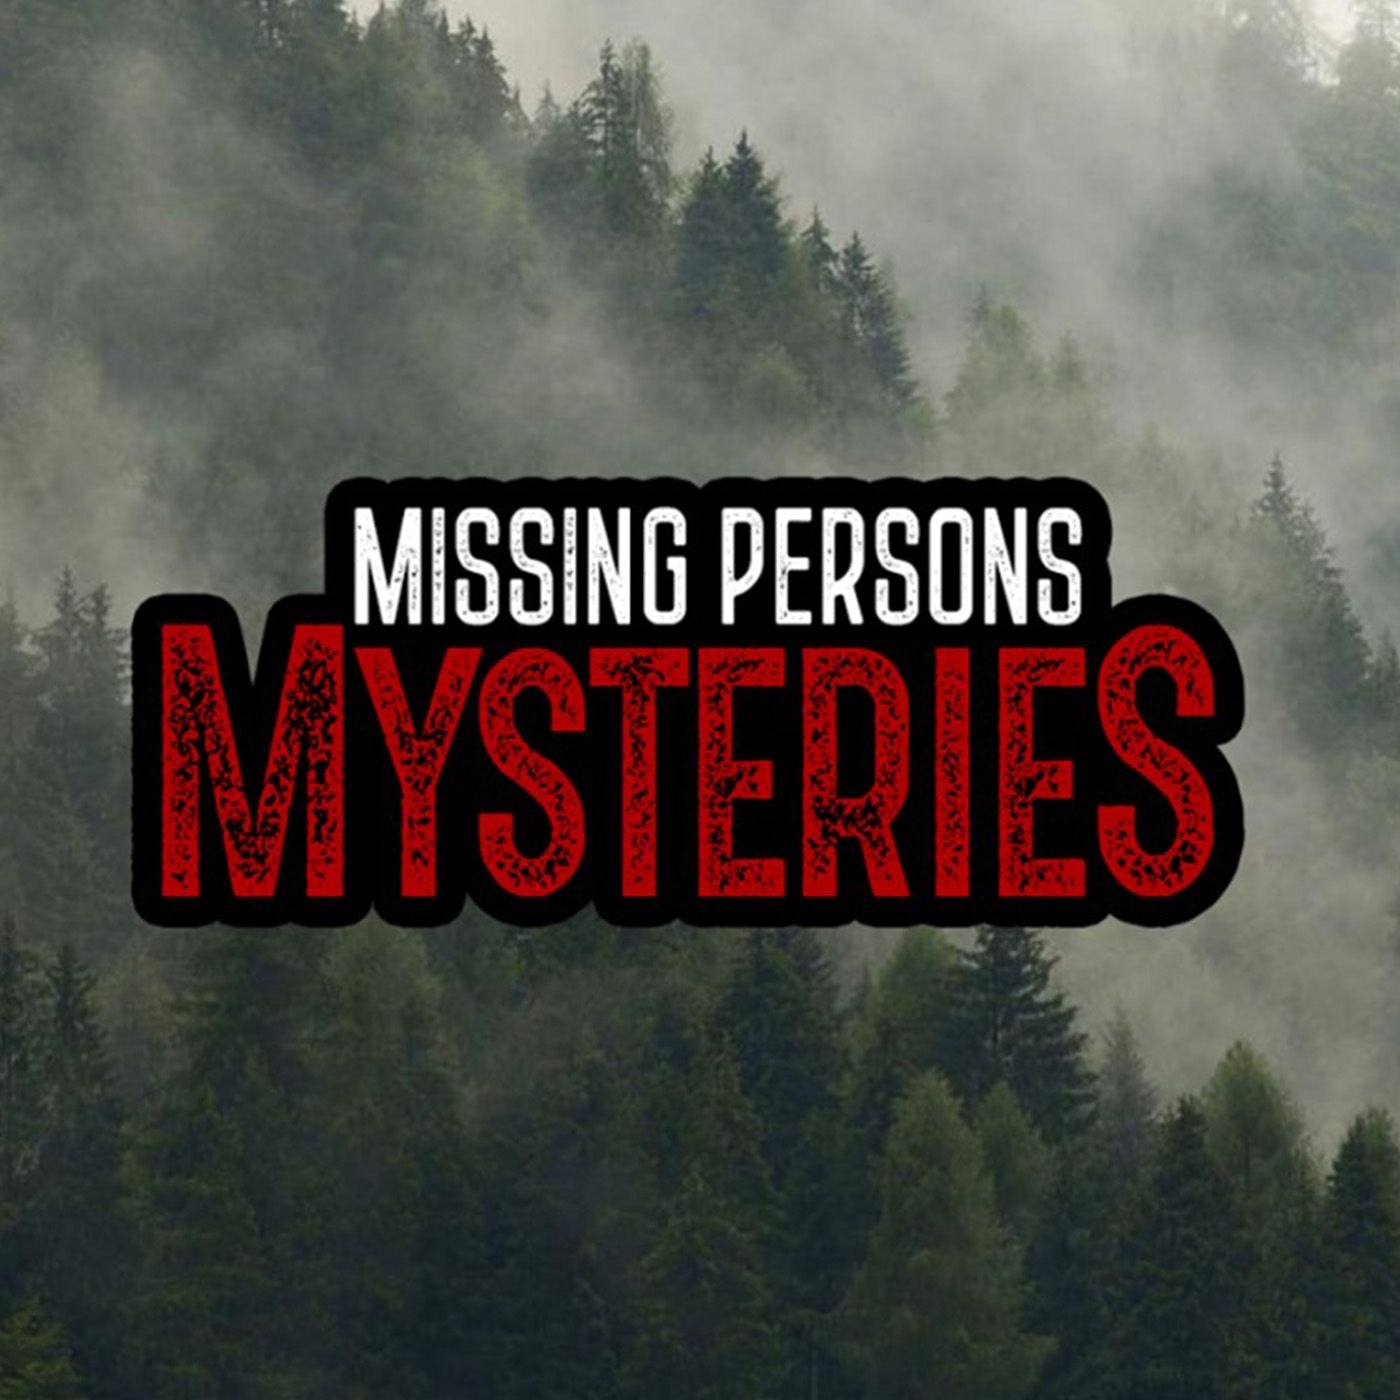 10 of the Strangest National Park Disappearances - Episode #11